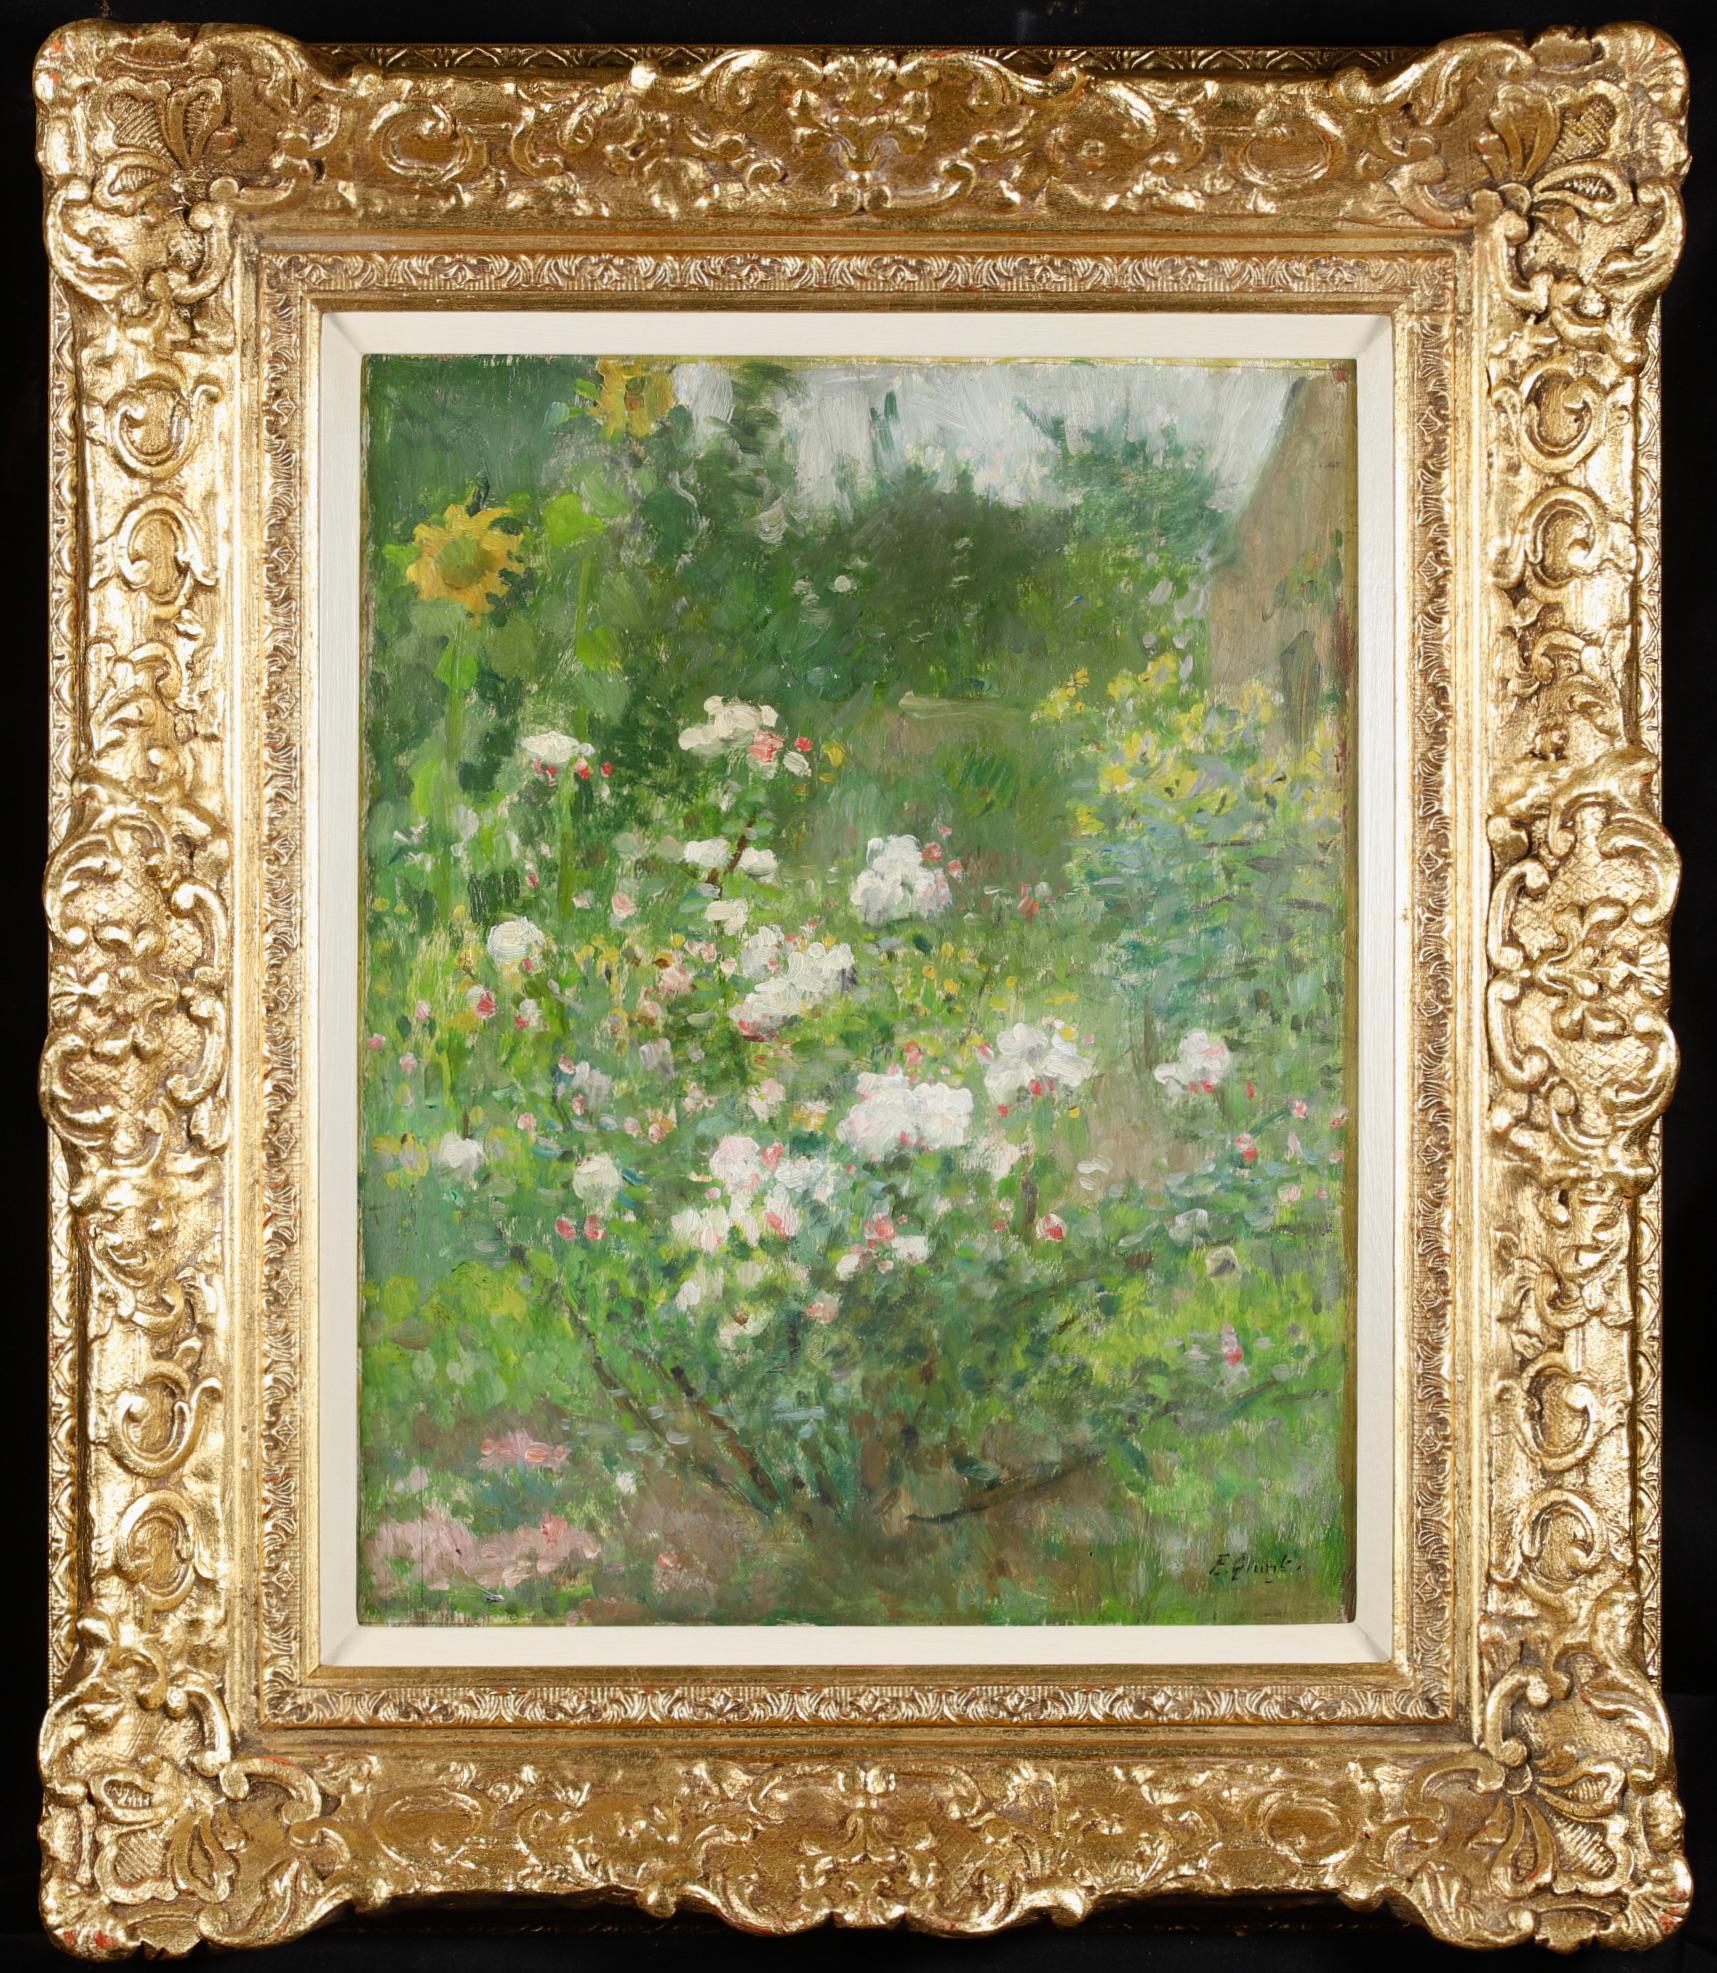 Signed oil on panel landscape by French impressionist painter Ernest Quost. The work depicts a beautiful green summer garden scene with rose bush covered in pale pink blooms in the front of the painting and sunflowers beyond.

Dimensions:
Framed: